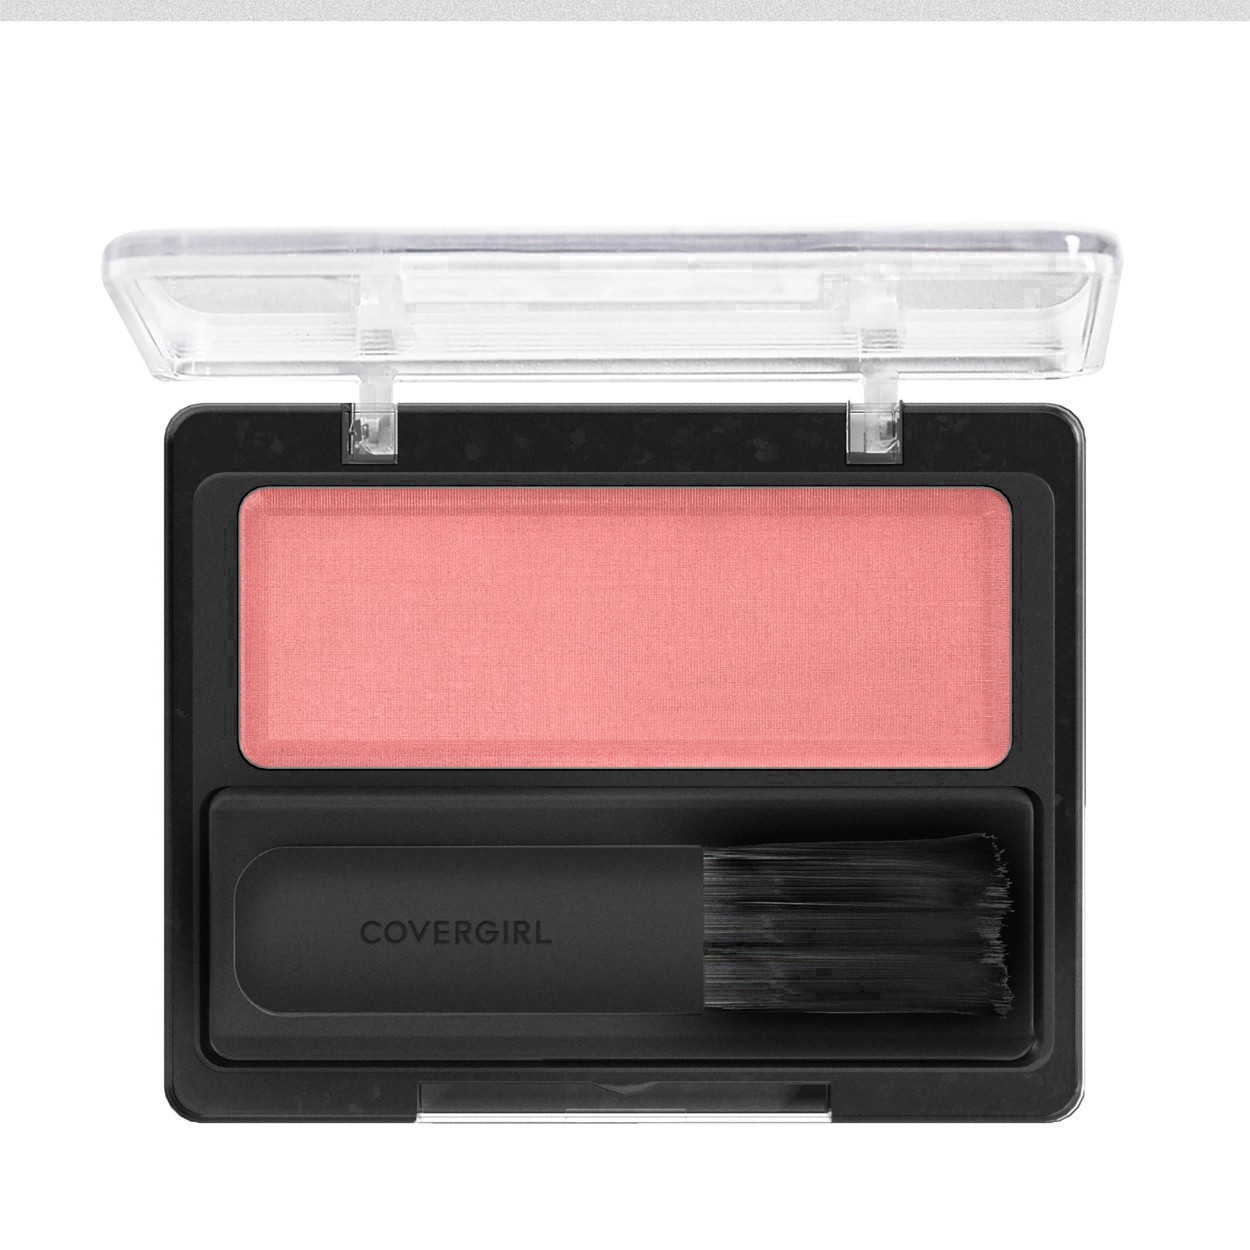 slide 19 of 42, Covergirl COVERGIRL Classic Color Blush Rose Silk, 1 ct